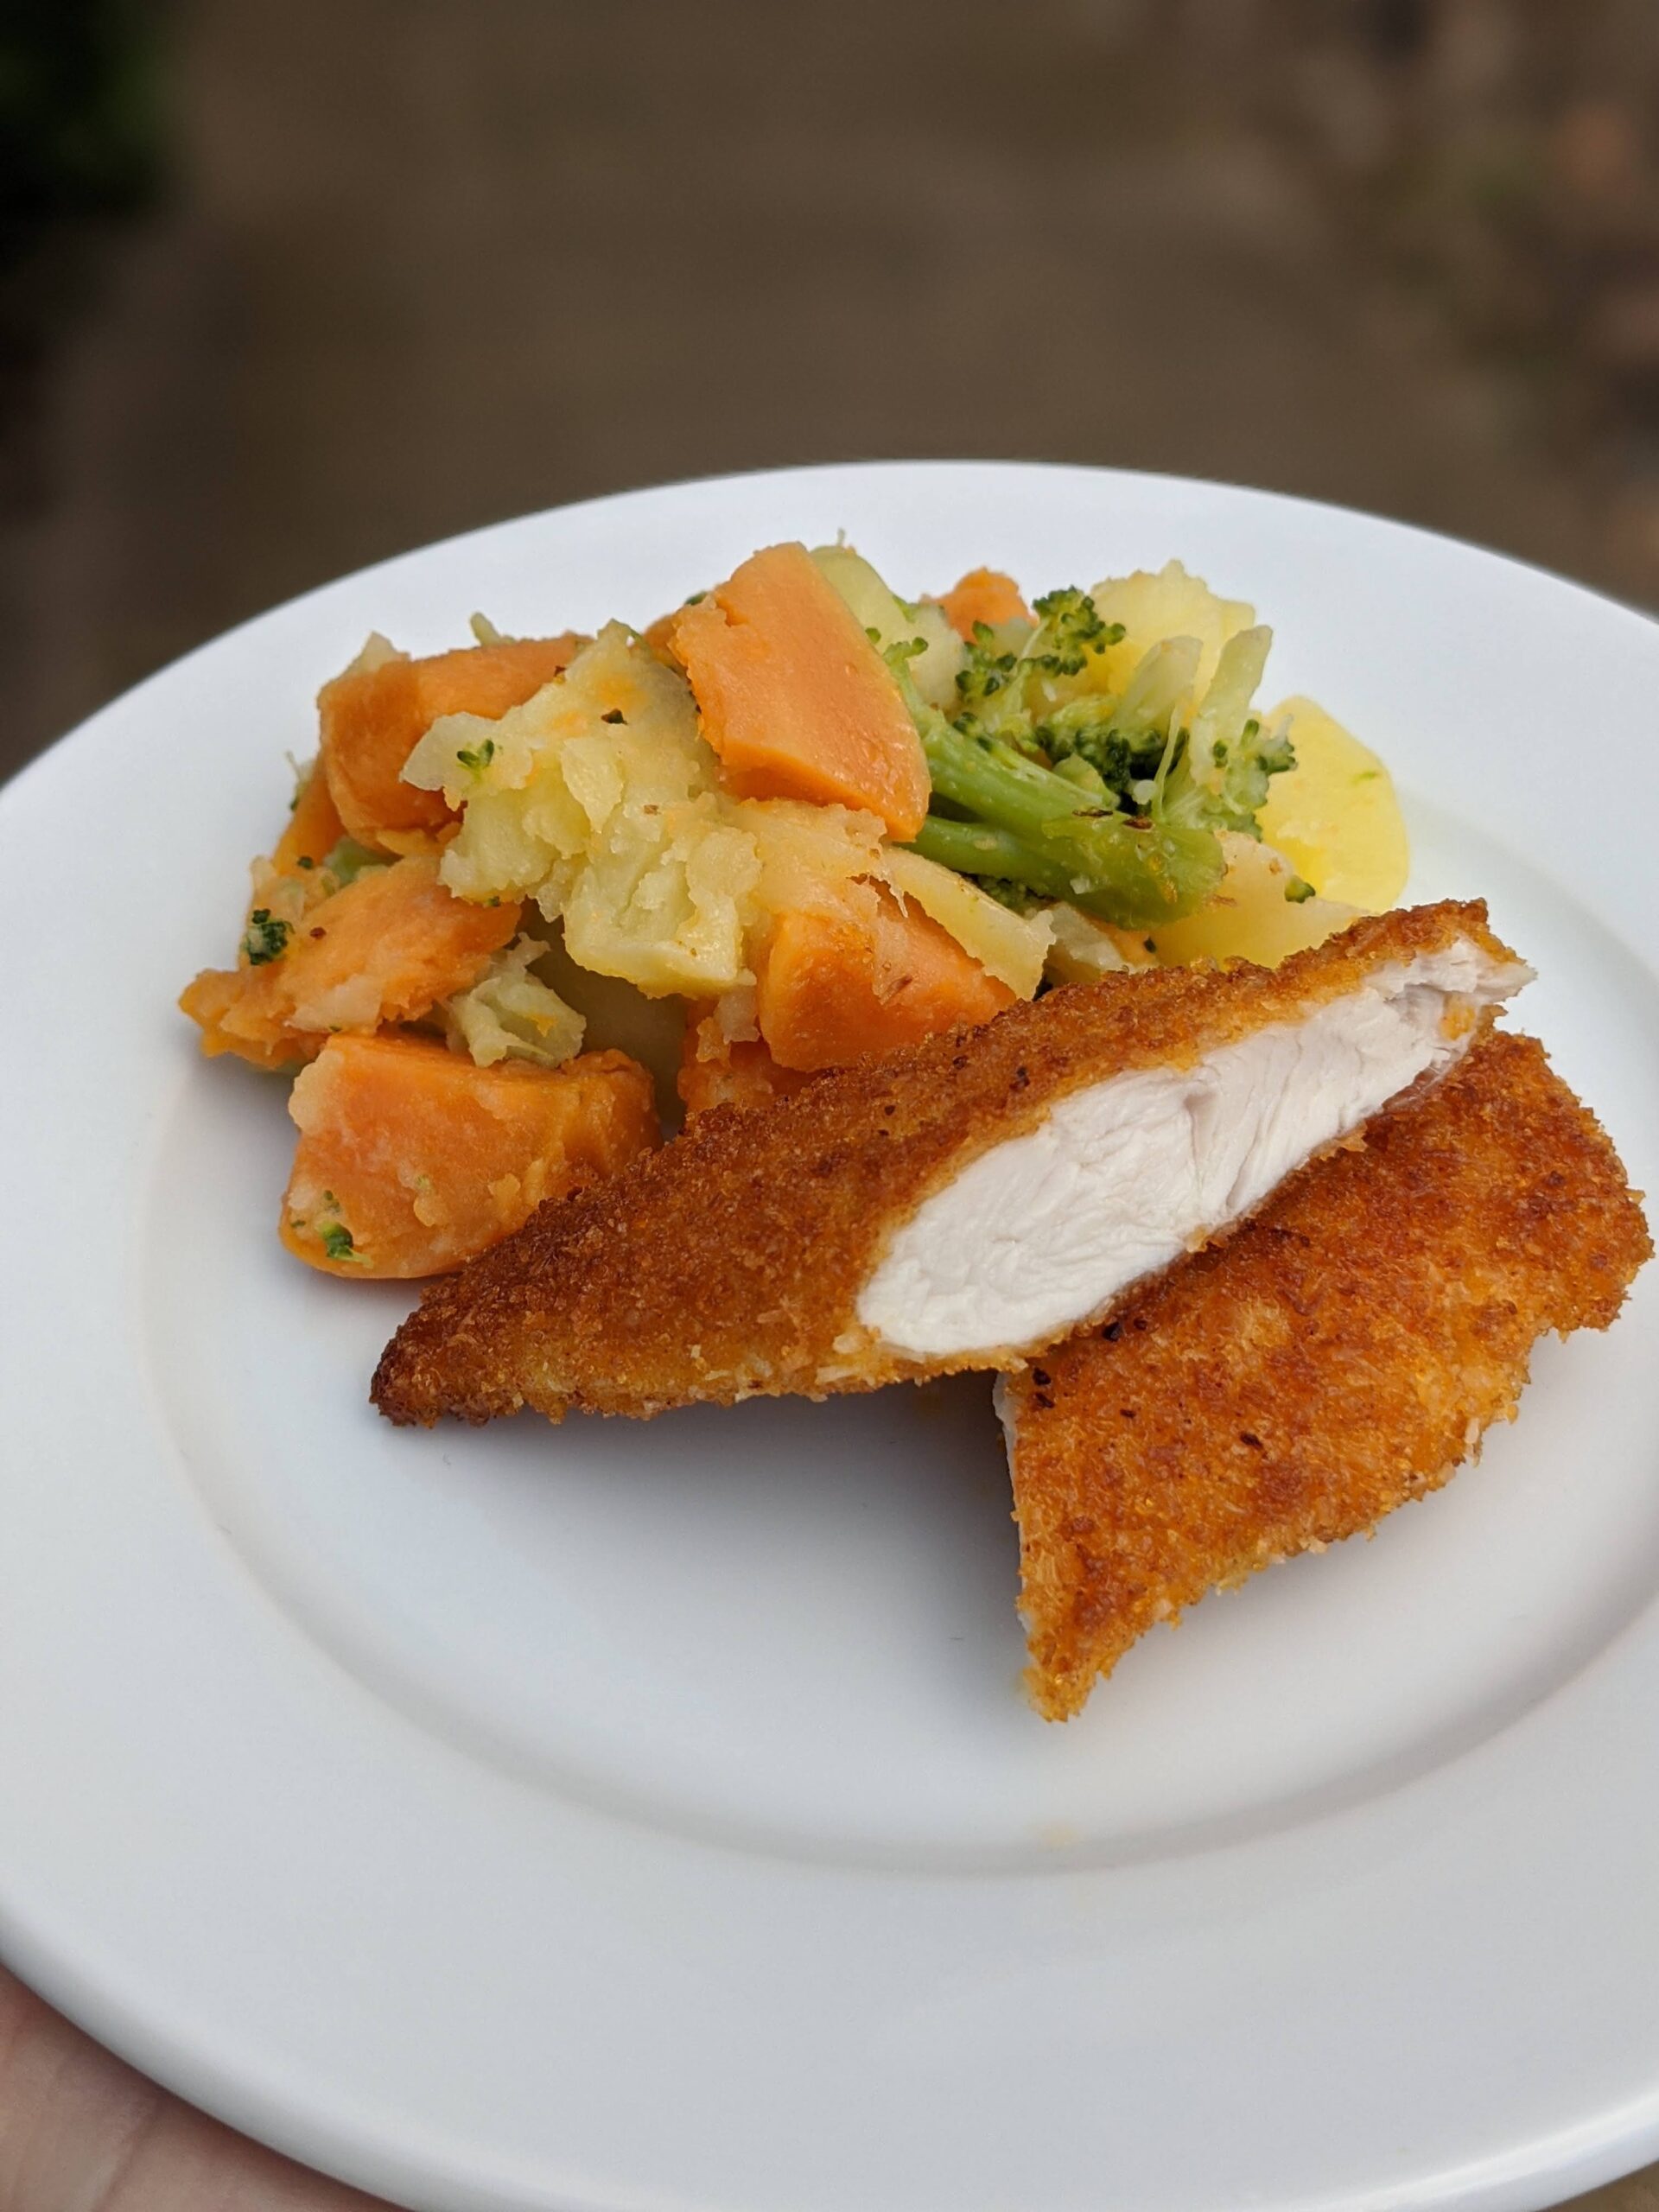 Coconut crusted chicken schnitzel served with vegetable mash